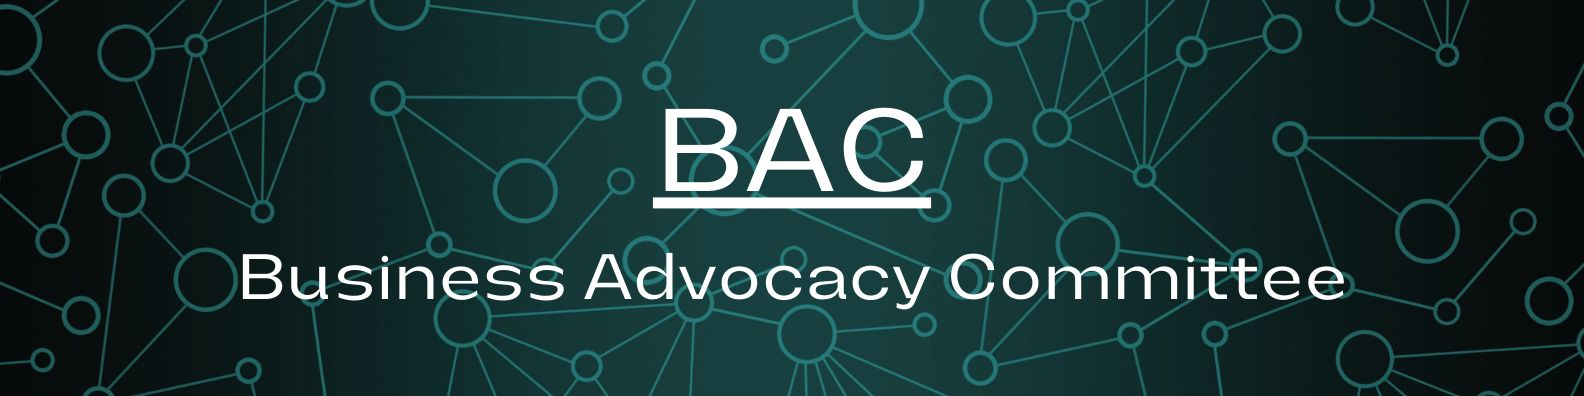 BAC Business Advocacy Committee Banner